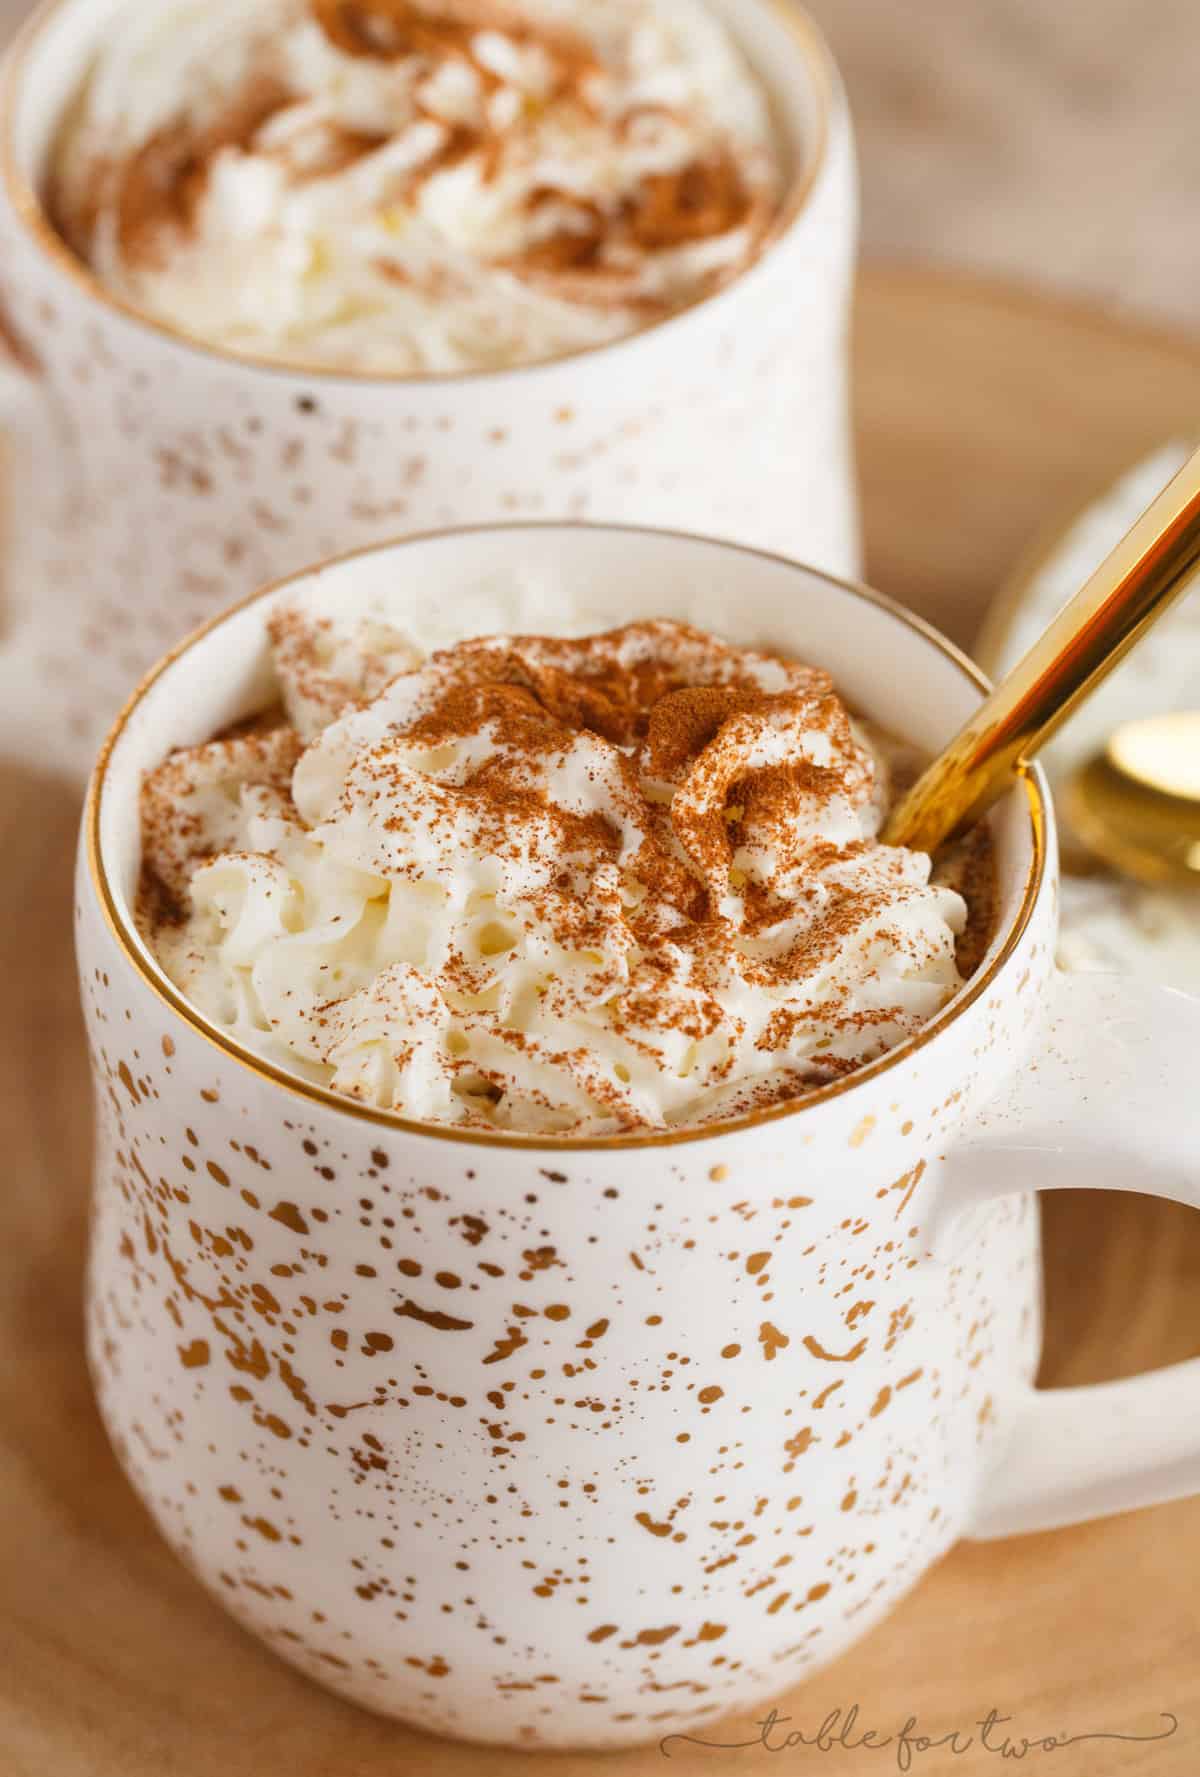 Warm and cozy spicy gingerbread lattes are the only way to beat the cold! These extra spicy gingerbread lattes are the best holiday homemade drink!